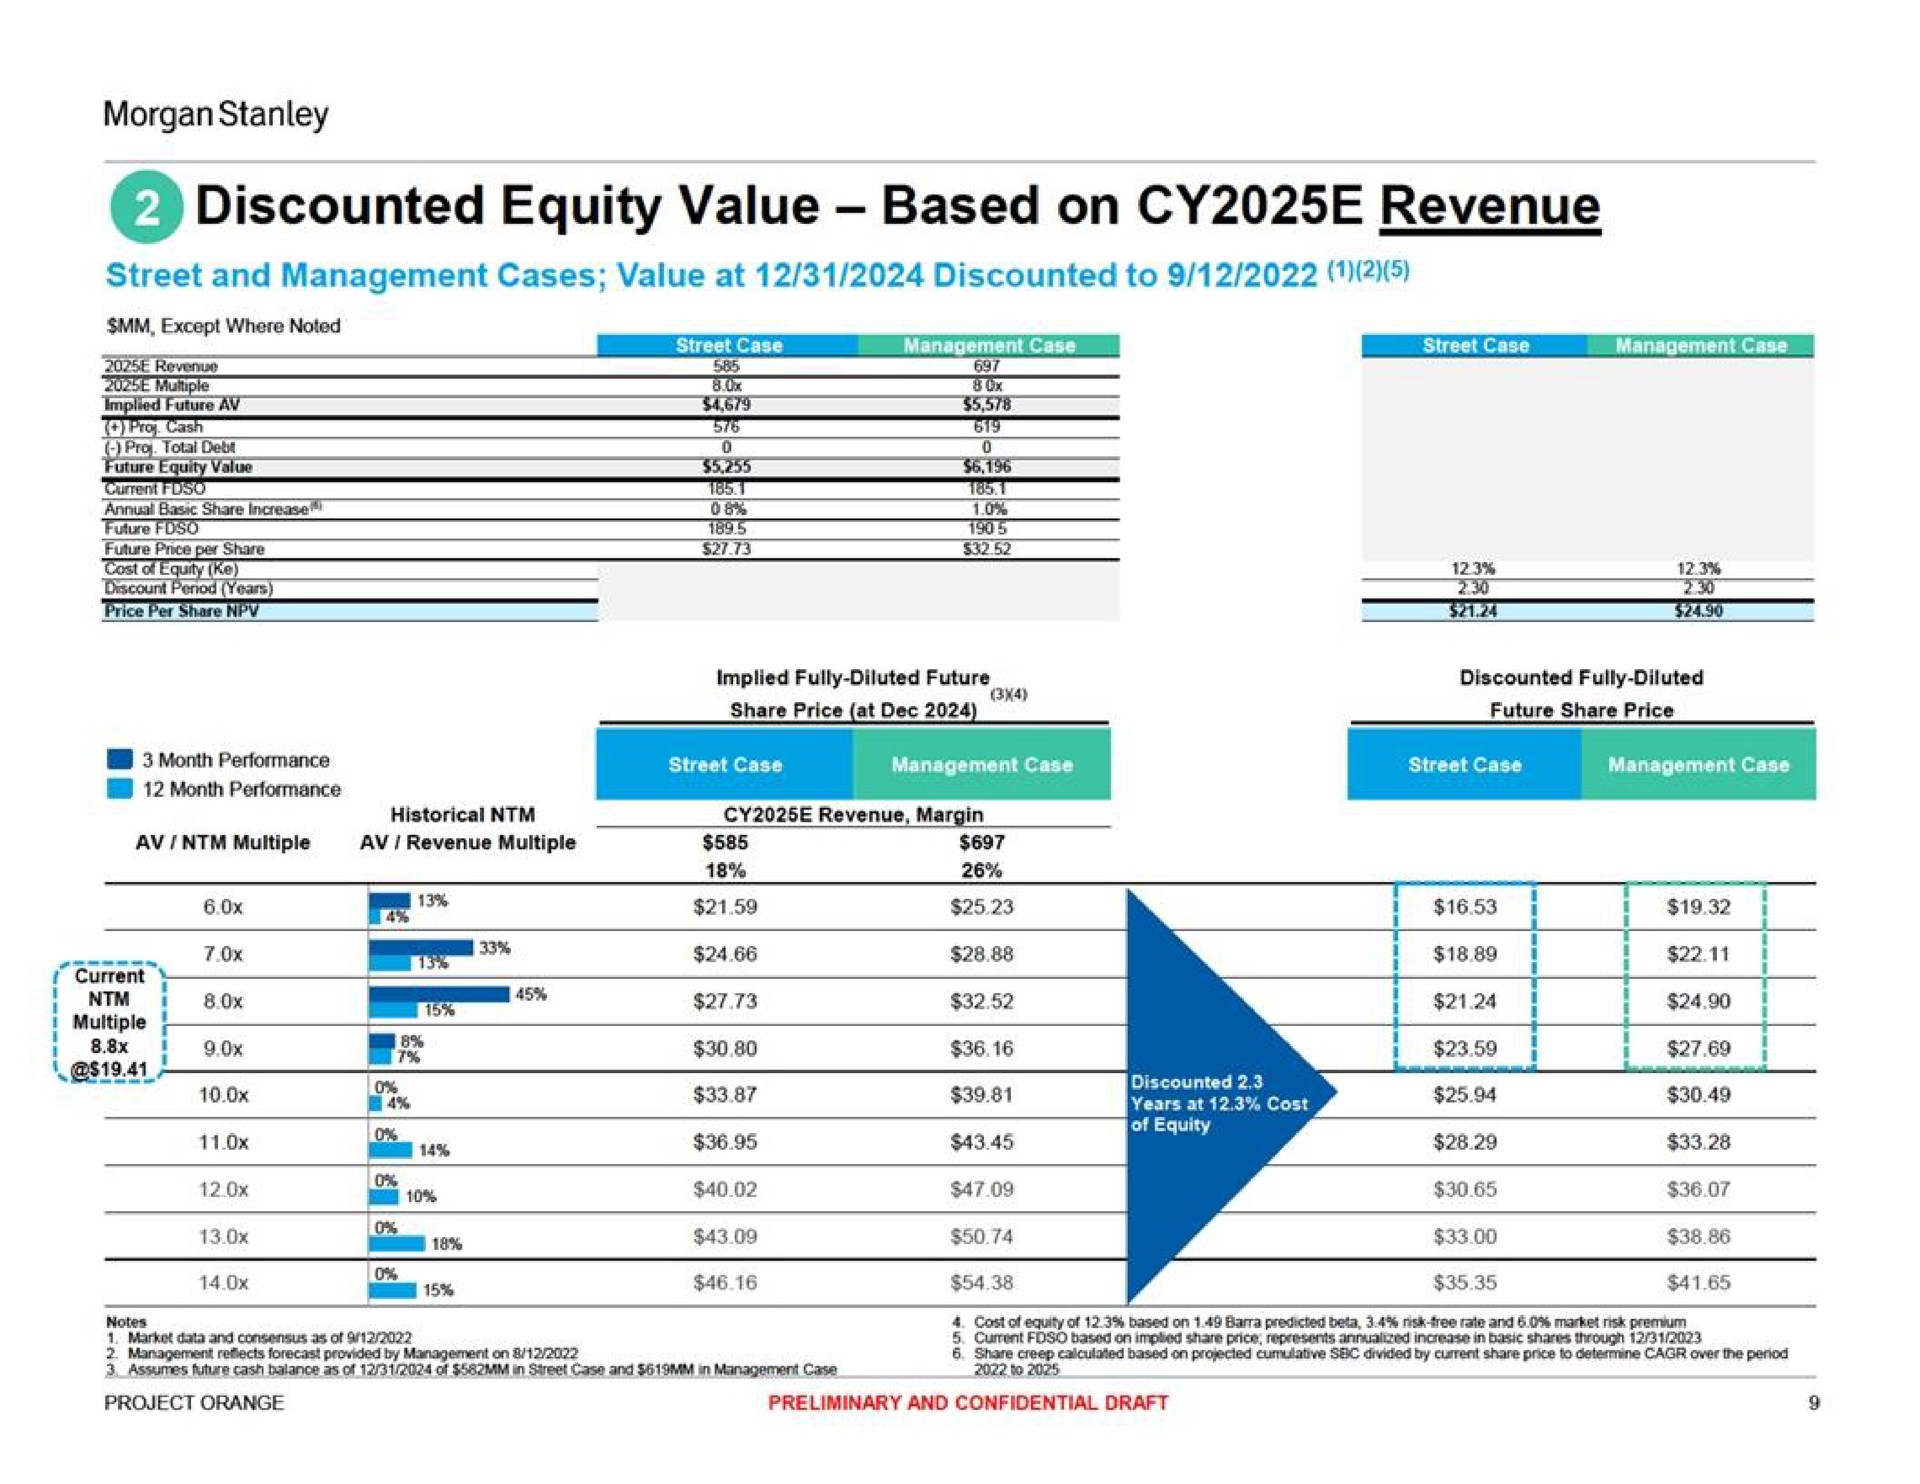 discounted equity value based on revenue | Morgan Stanley